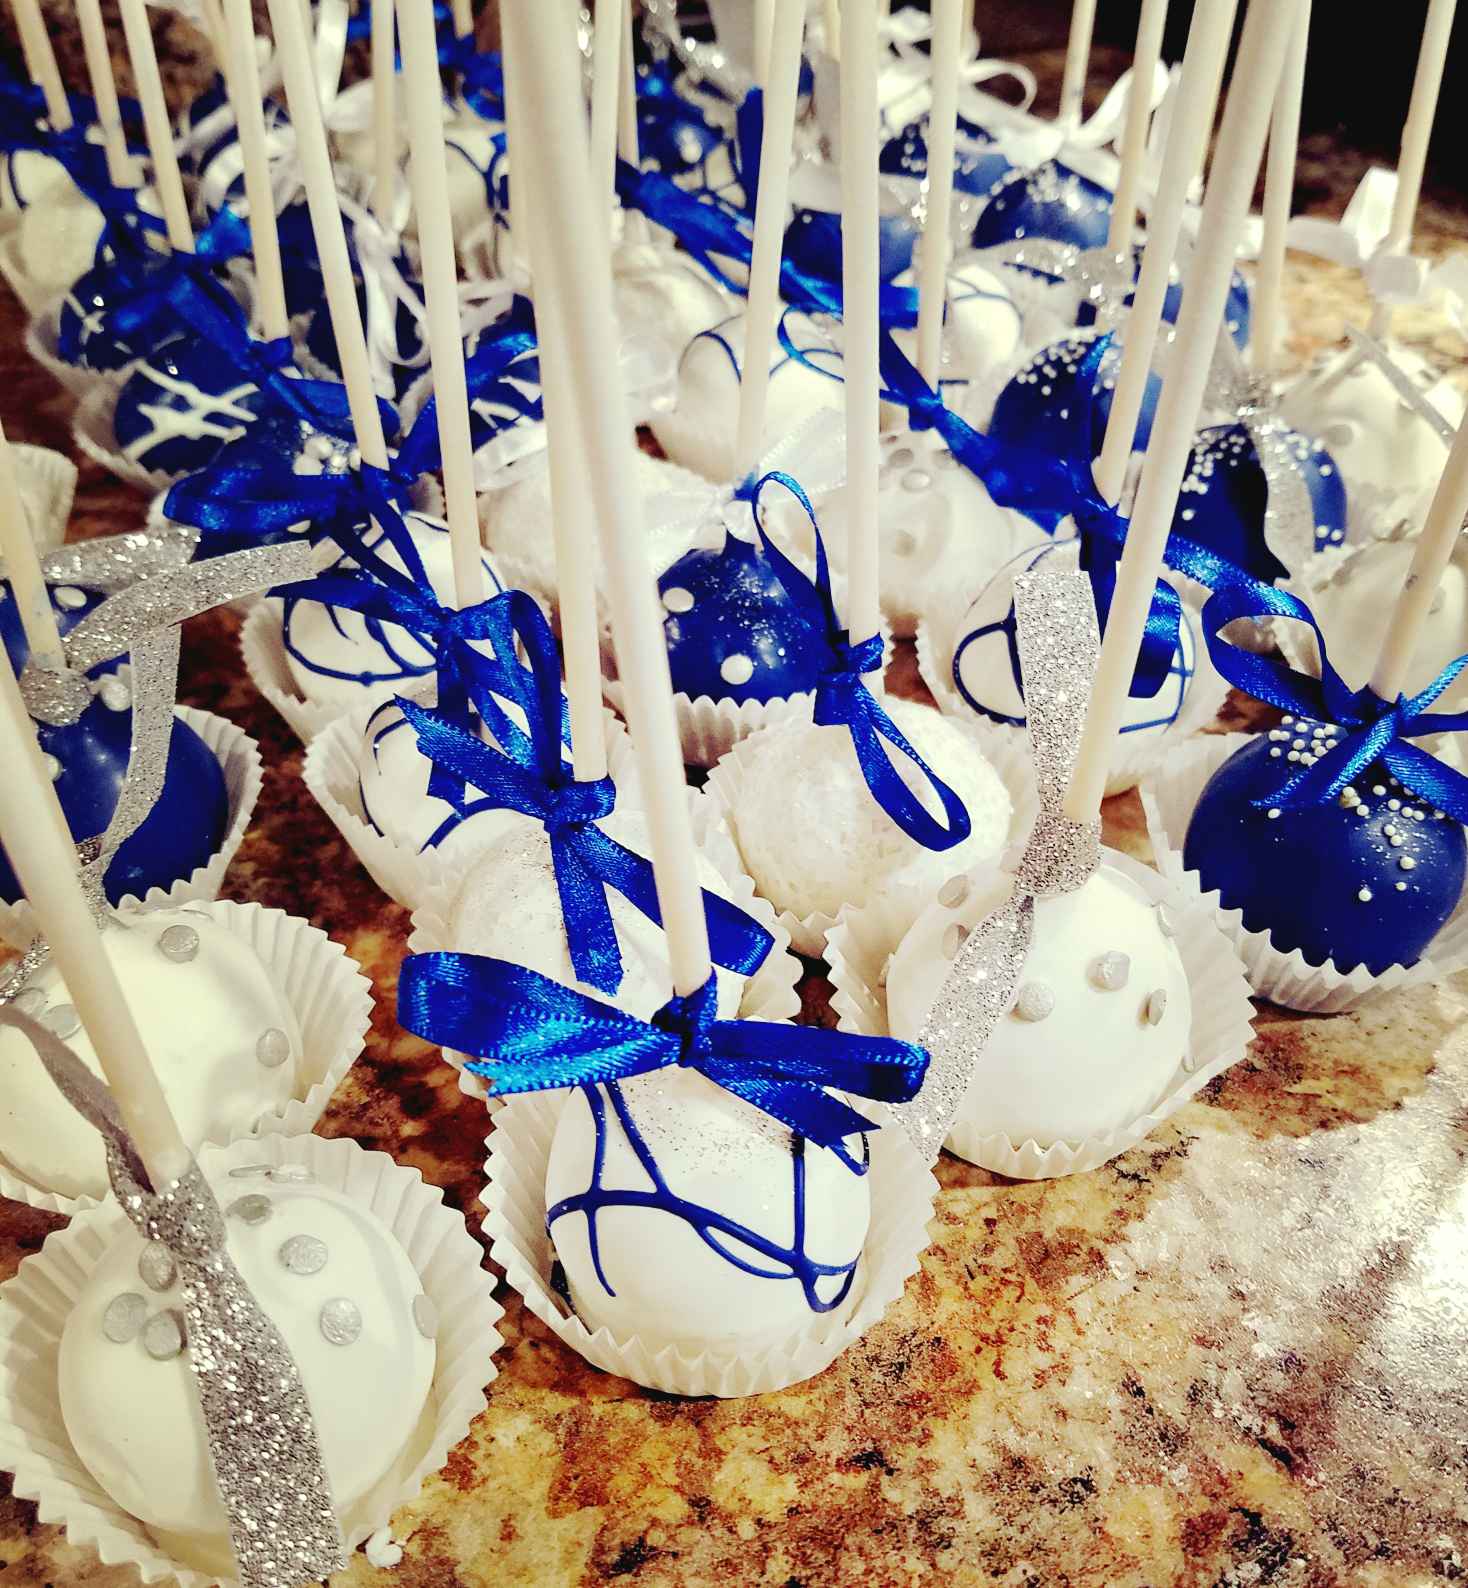 Sweet Treats by Tracie Cakepops